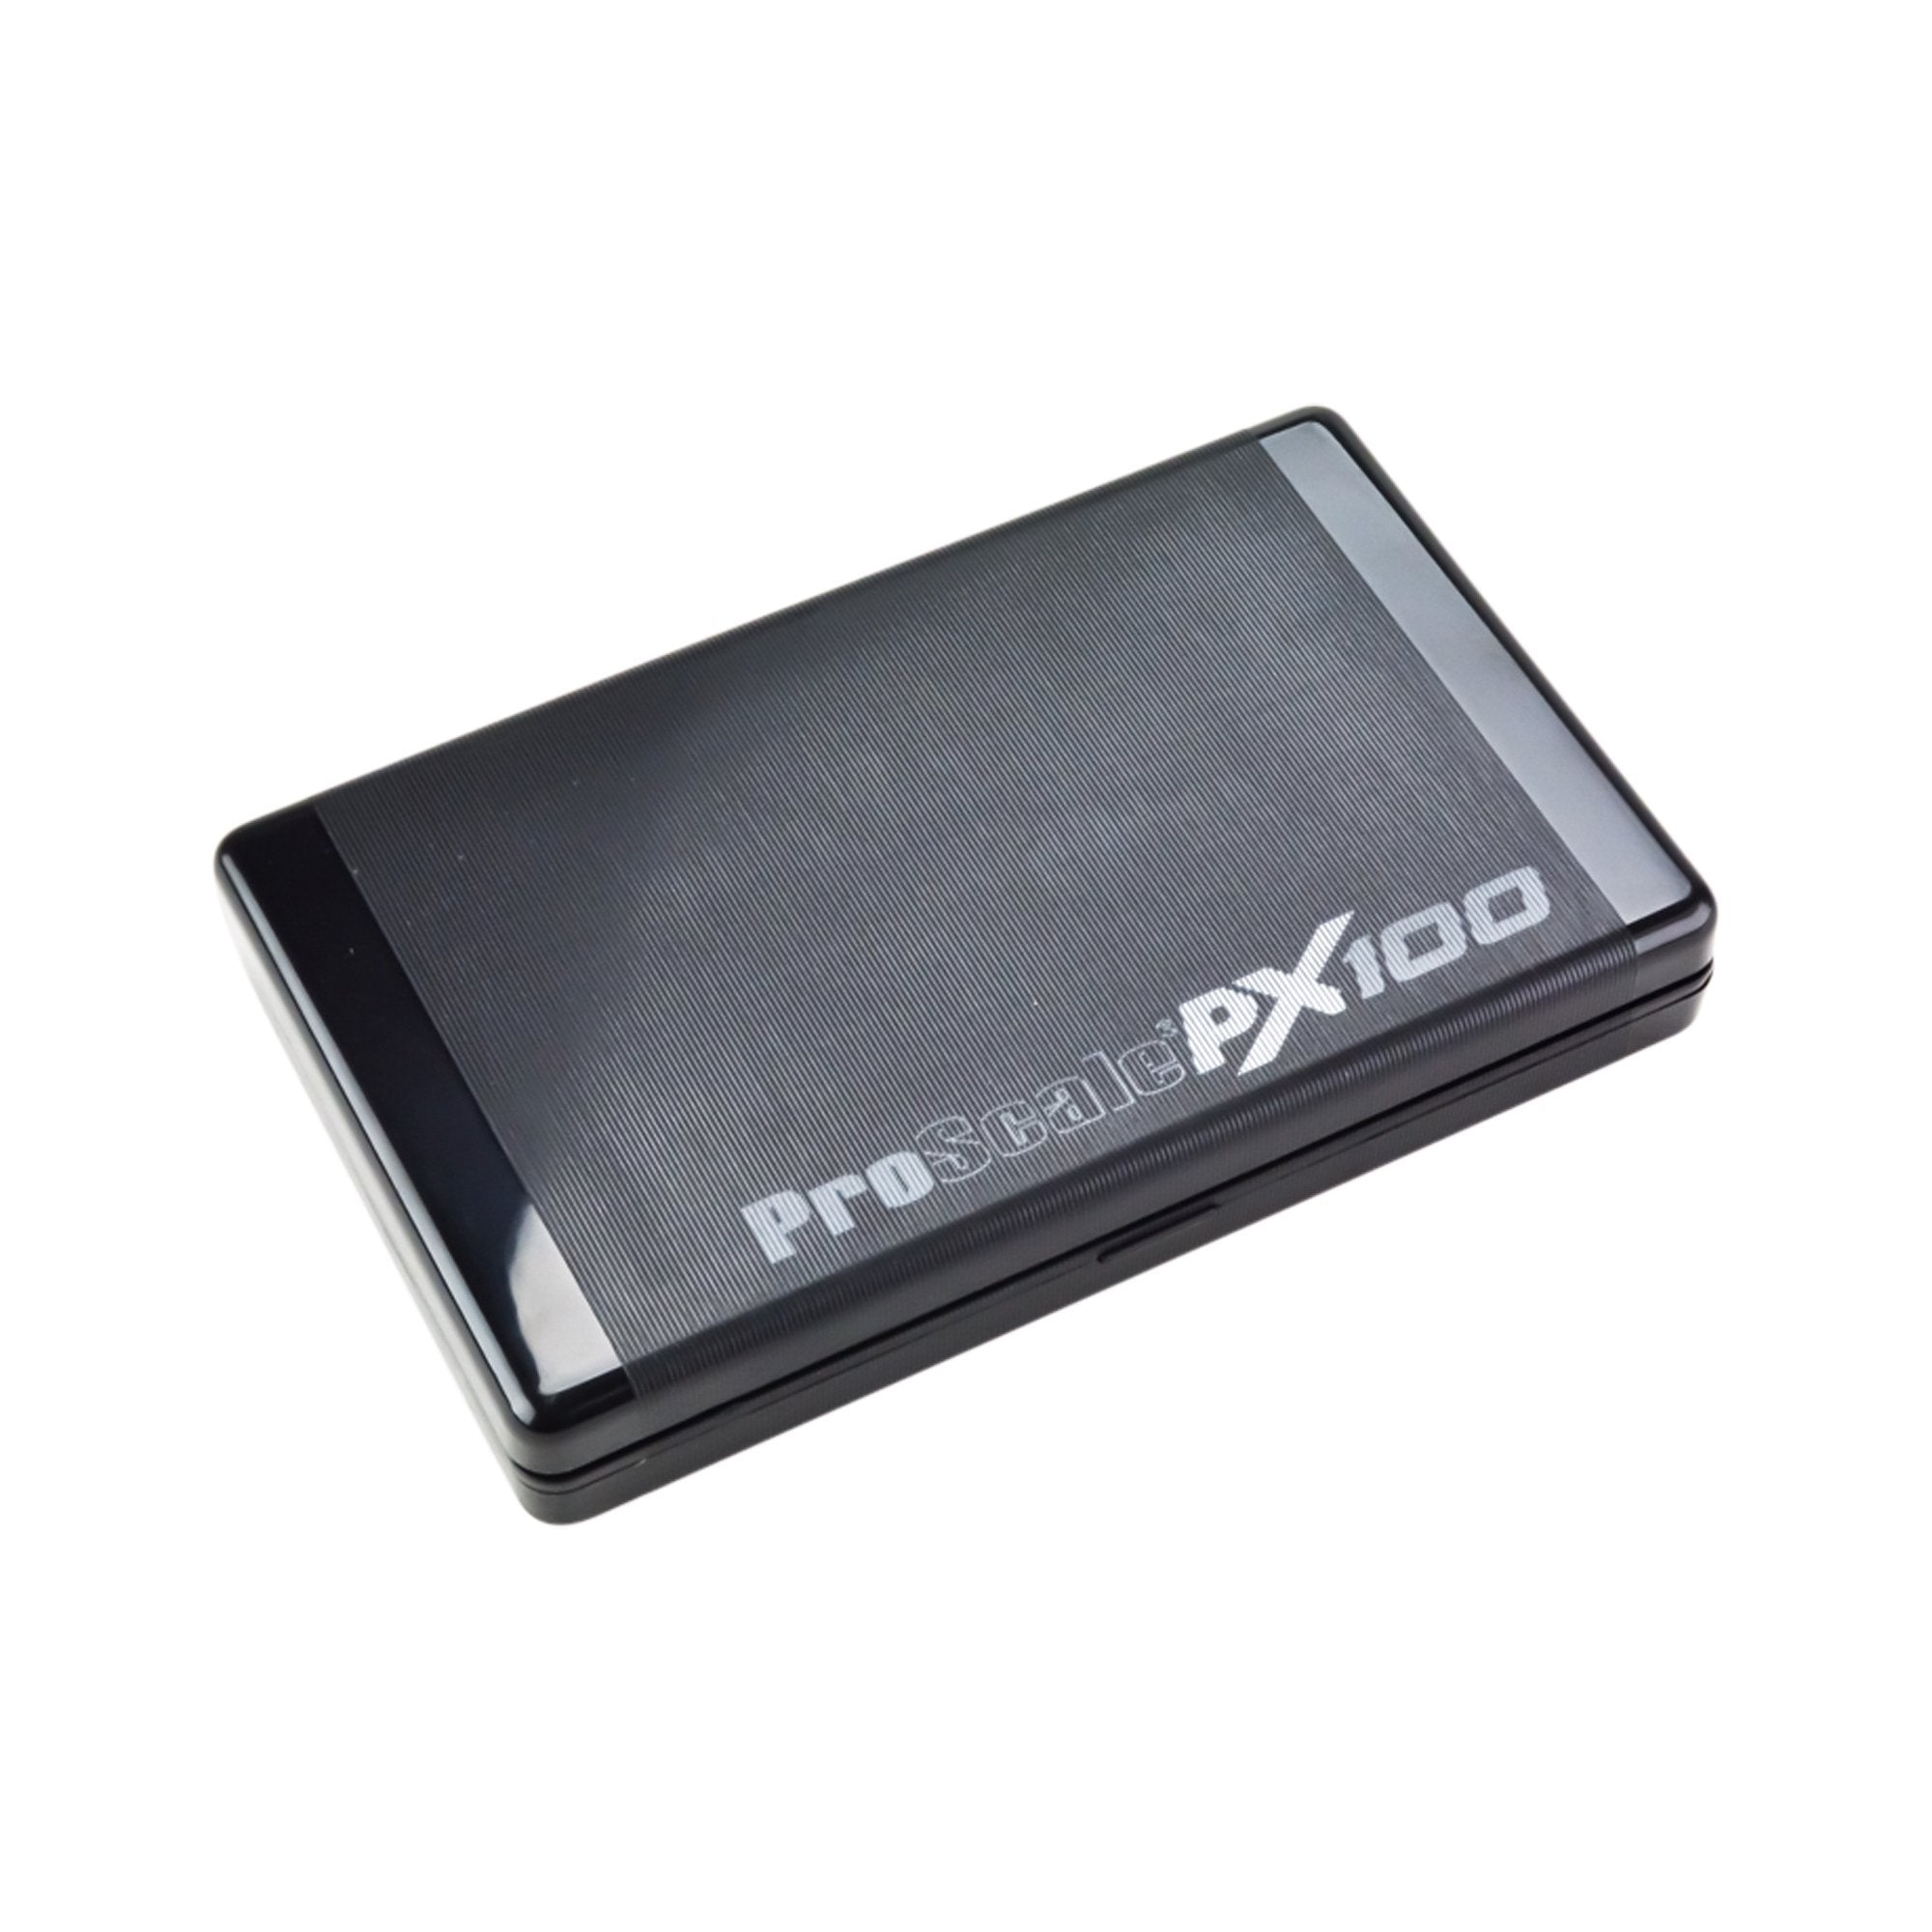 PRO SCALE | PX100 Digital Scale | 100g Capacity - 0.01g Readability - 3